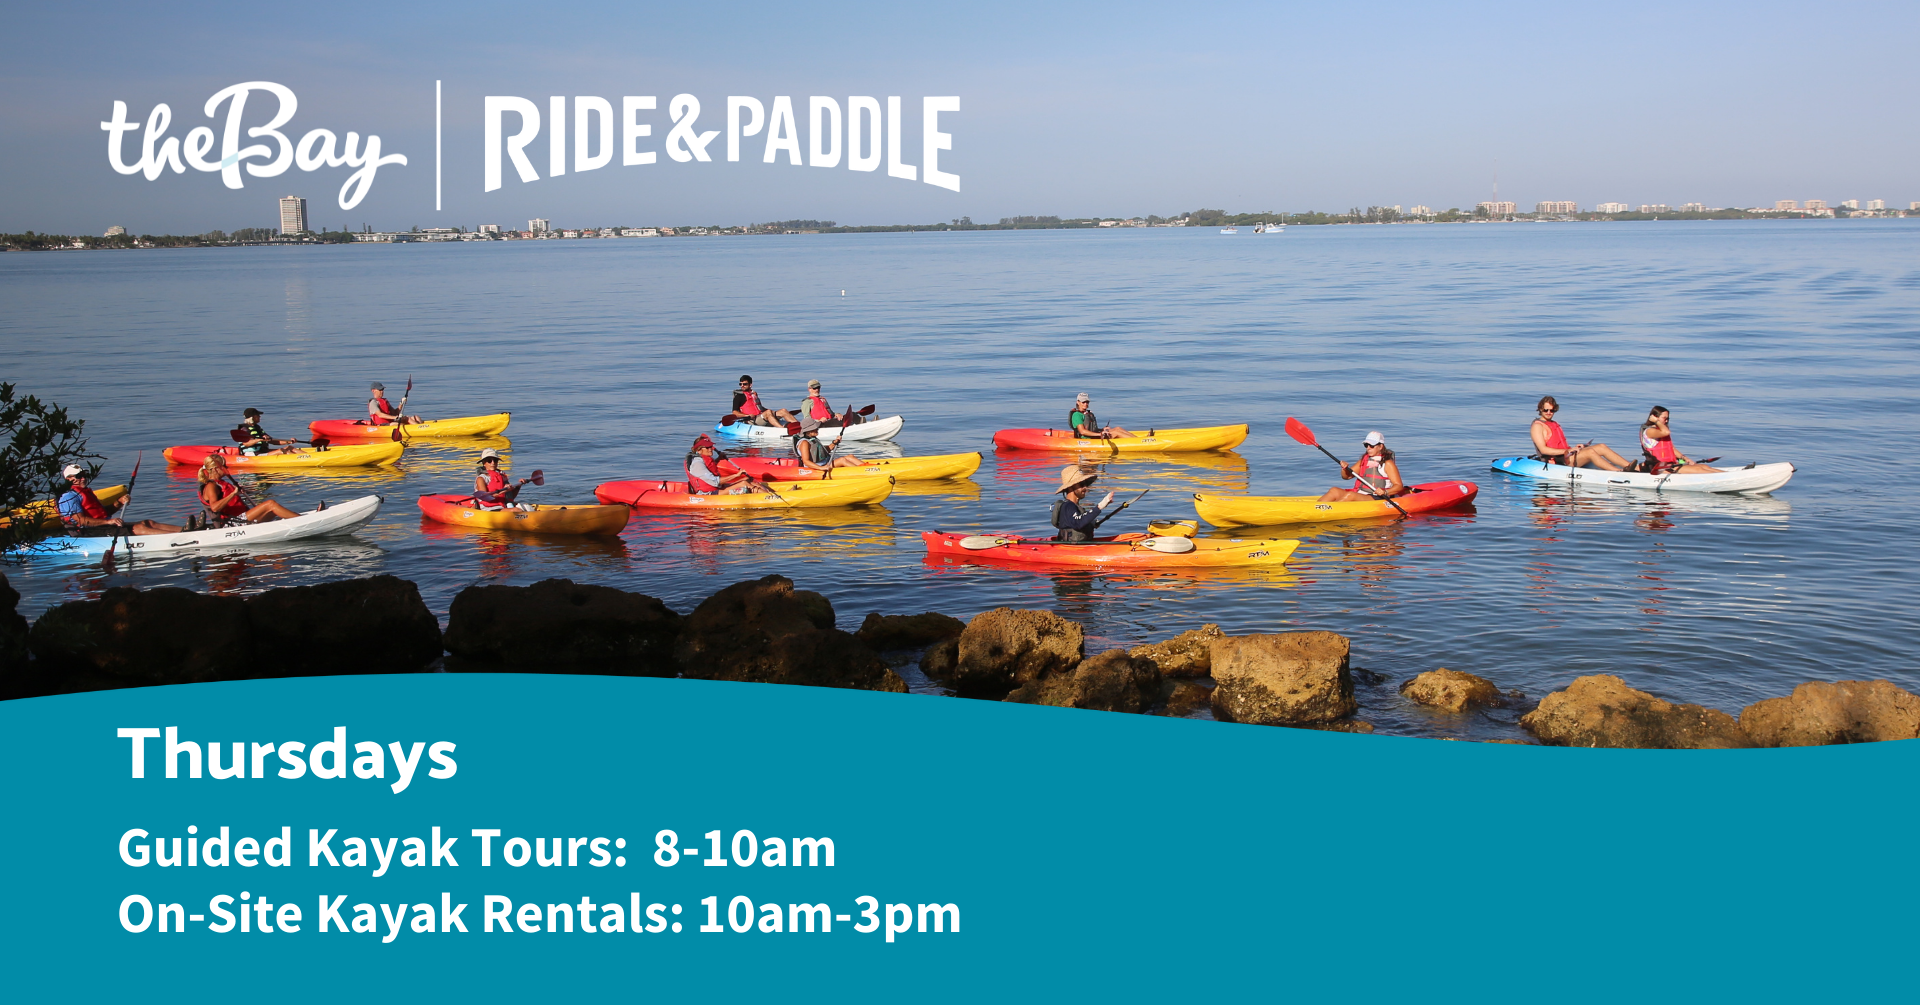 Kayak and Paddle Boarding Now Available at The Bay! - The Bay Sarasota